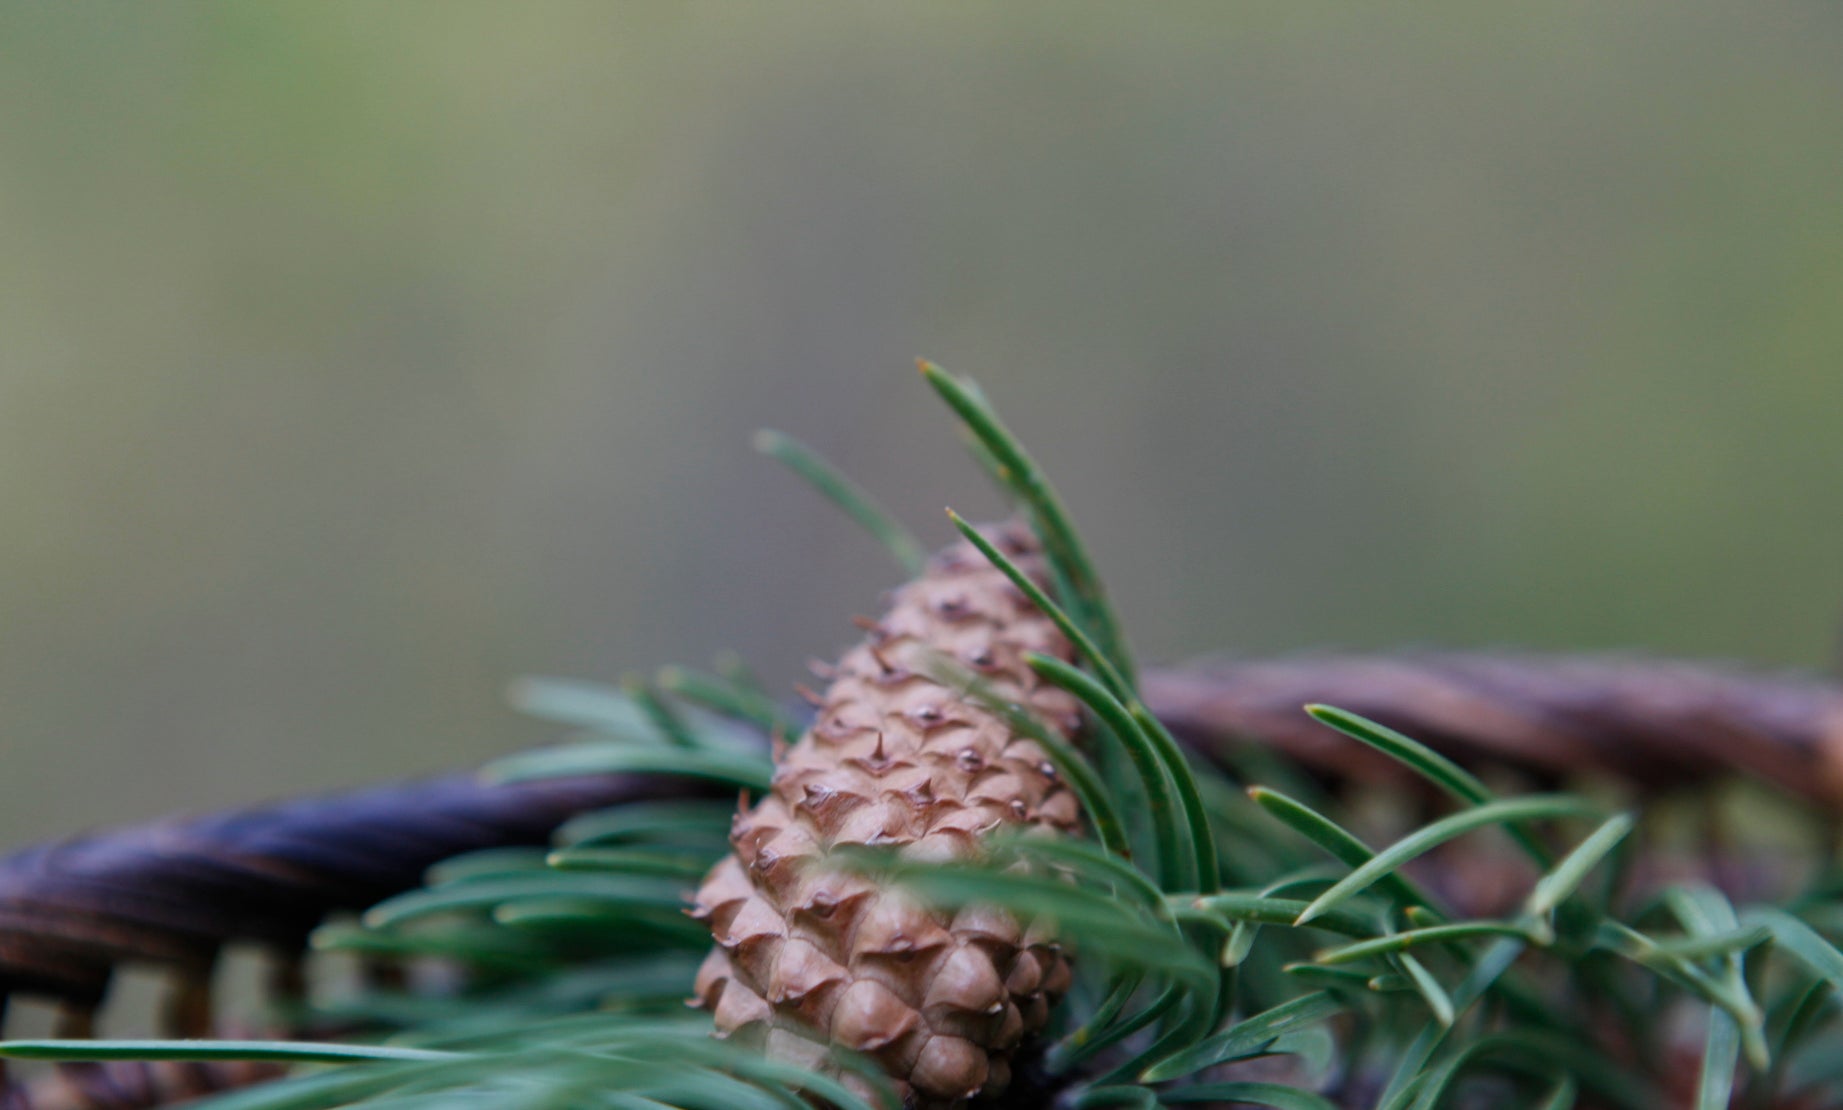 Pine cones and pine needles in a basket for pine needle tea